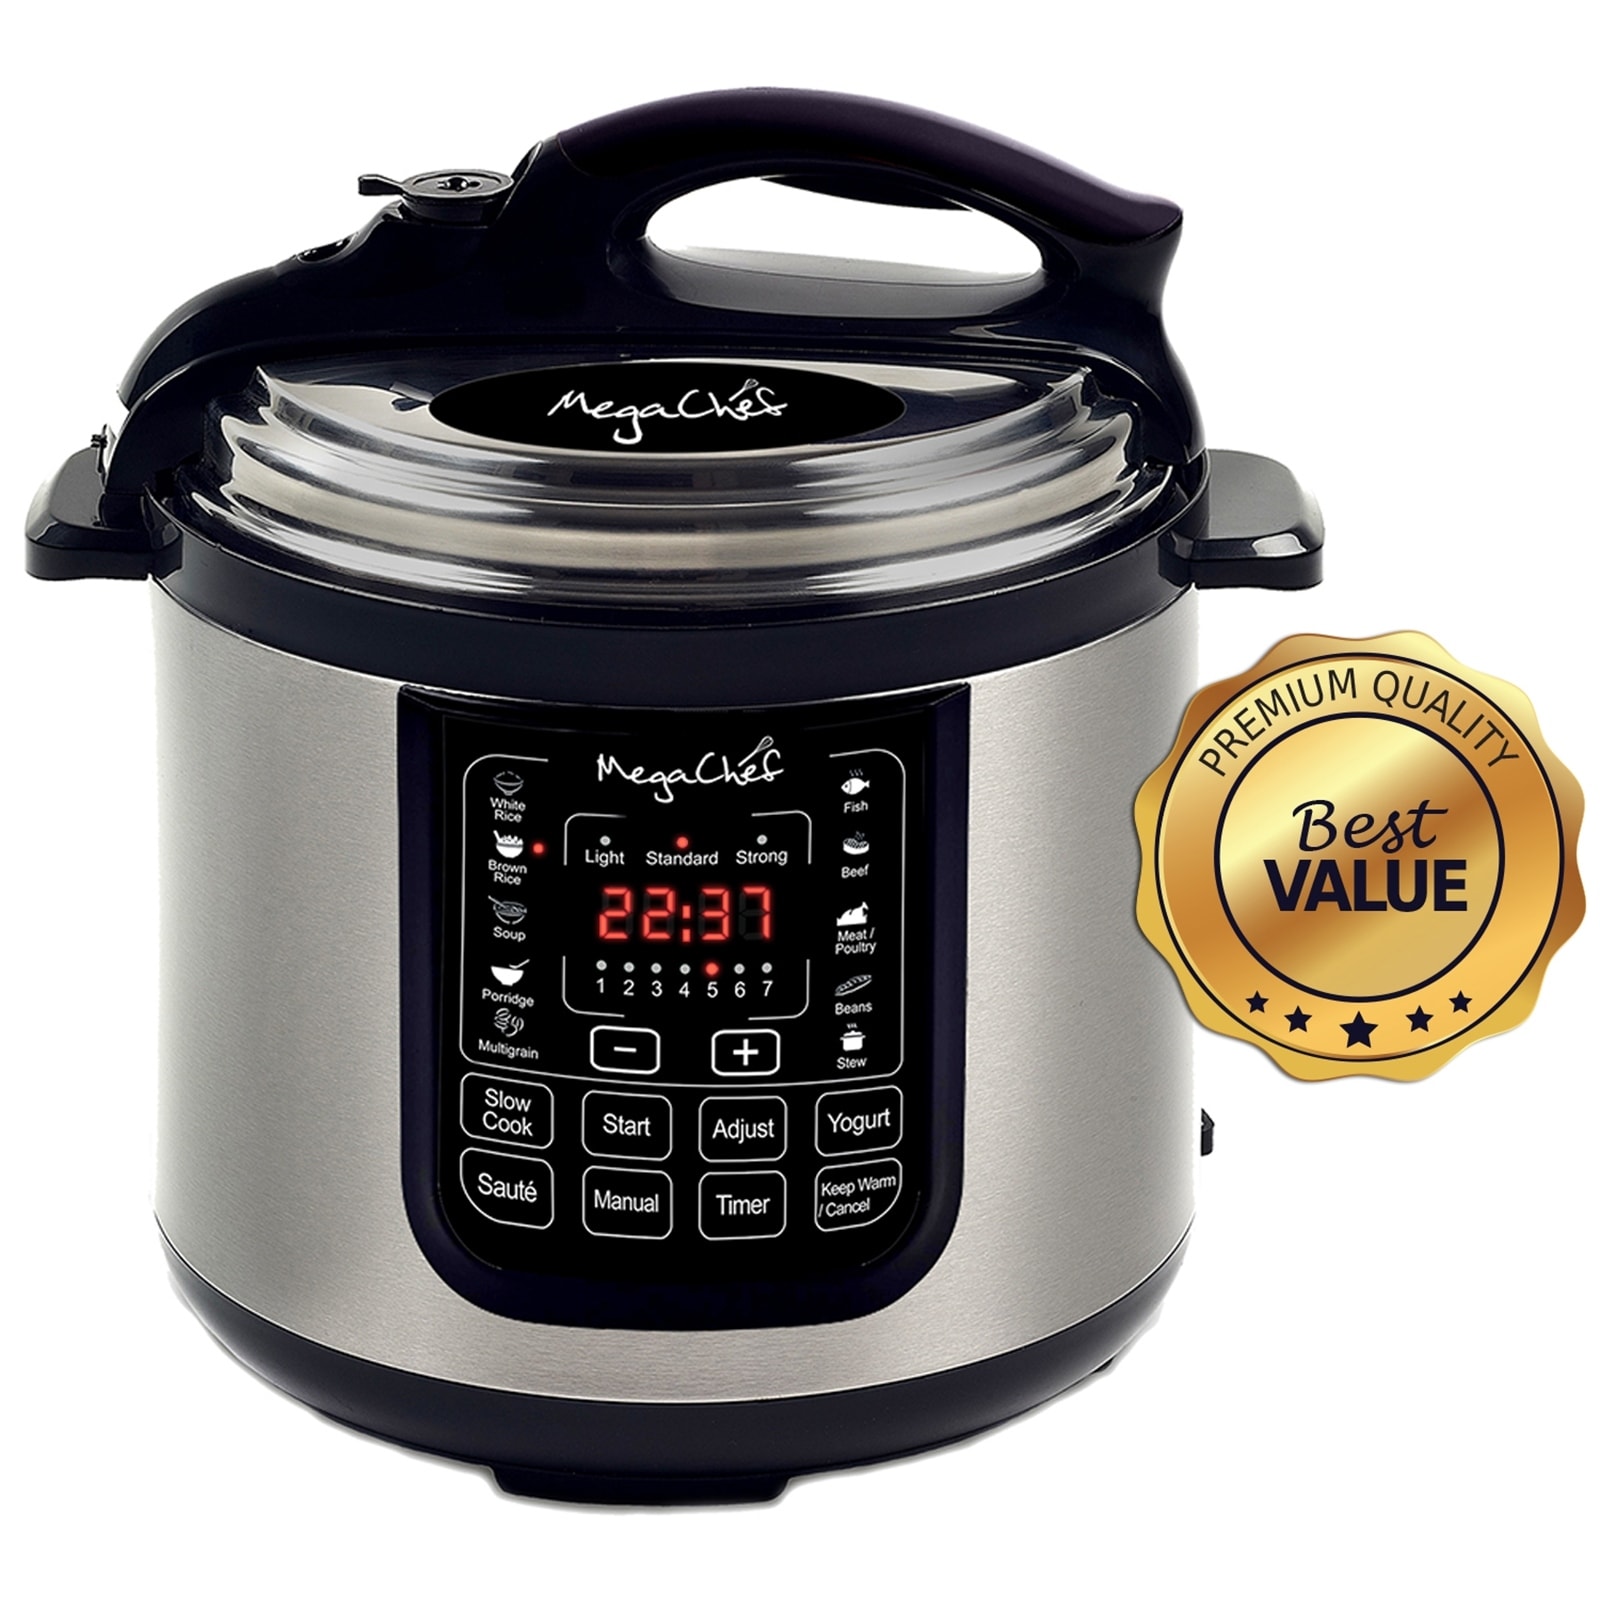 https://ak1.ostkcdn.com/images/products/is/images/direct/4a06f8702edeb3be4887ed118a60e99fbc21acf2/MegaChef-Digital-Countertop-Pressure-Cooker-with-8-Quart-Capacity.jpg